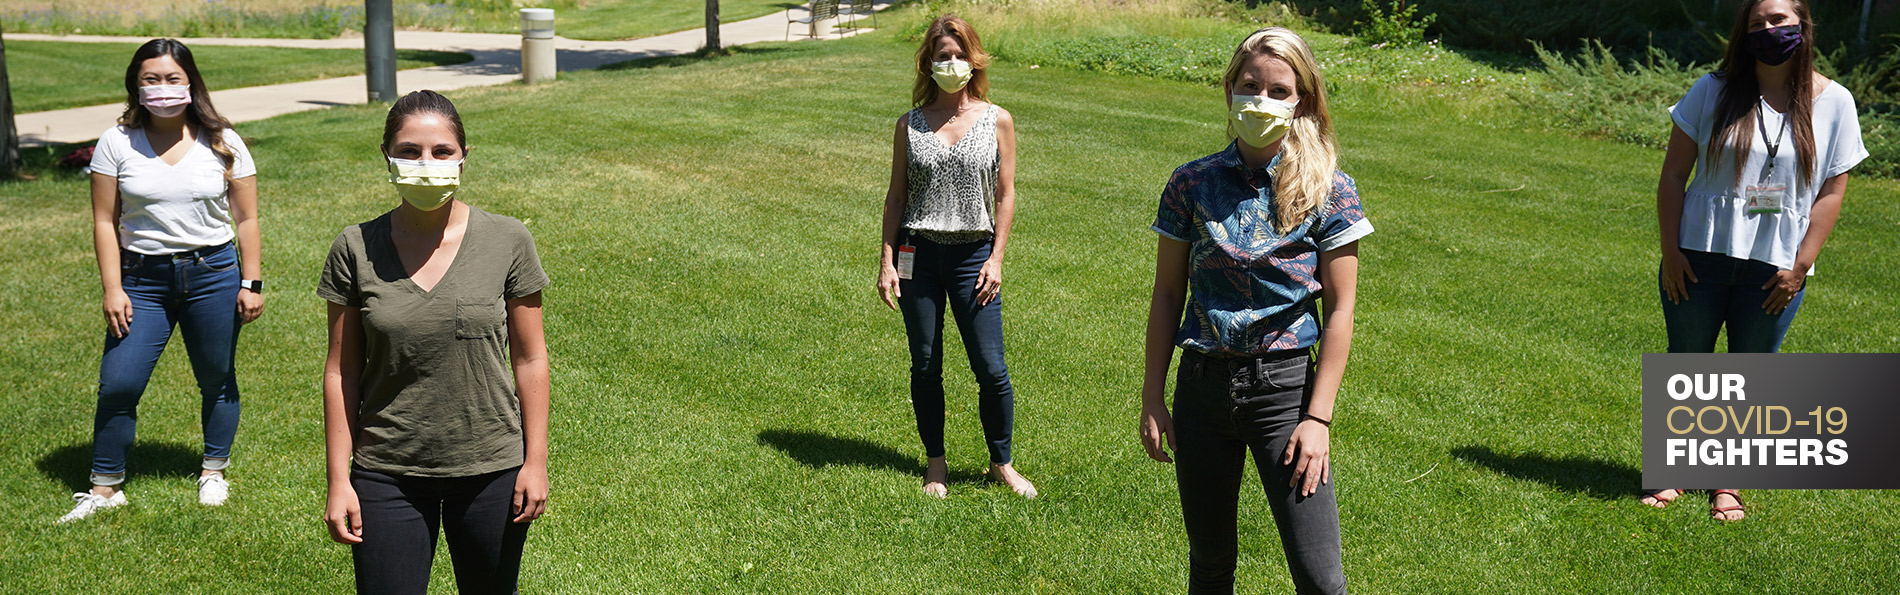 Students pose in masks on green lawn